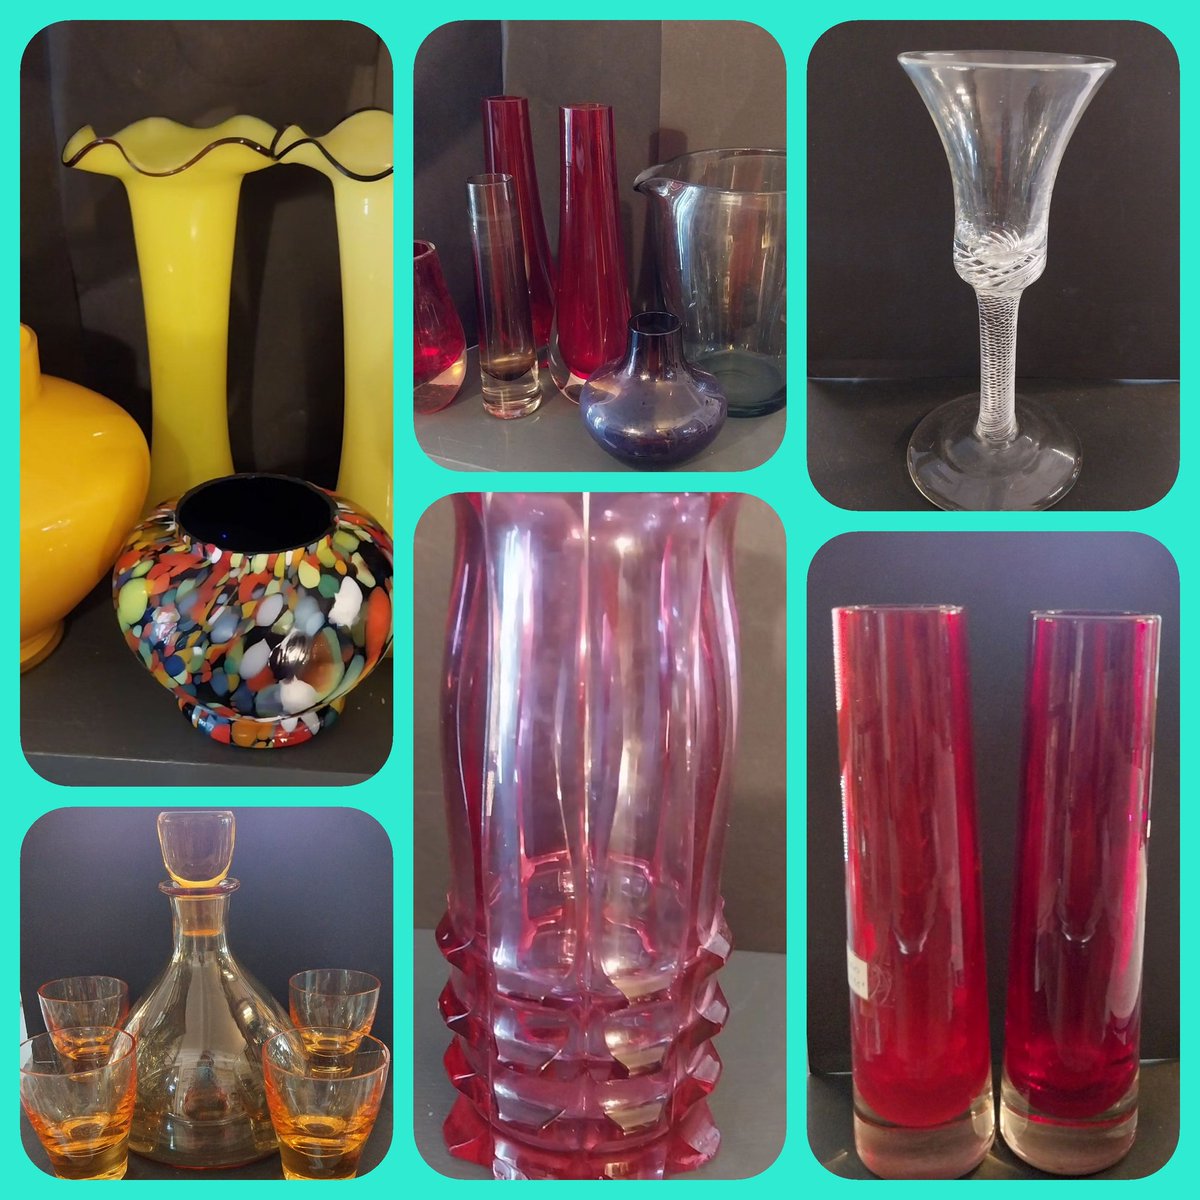 Some of the glassware entered for our #suffolkauction on 19th Nov.
randrsuffolkauctions.co.uk 
#whitefriars #suffolkglass #collectableglass #Newmarket #Sudbury #Cambridge #Haverhill #Clare